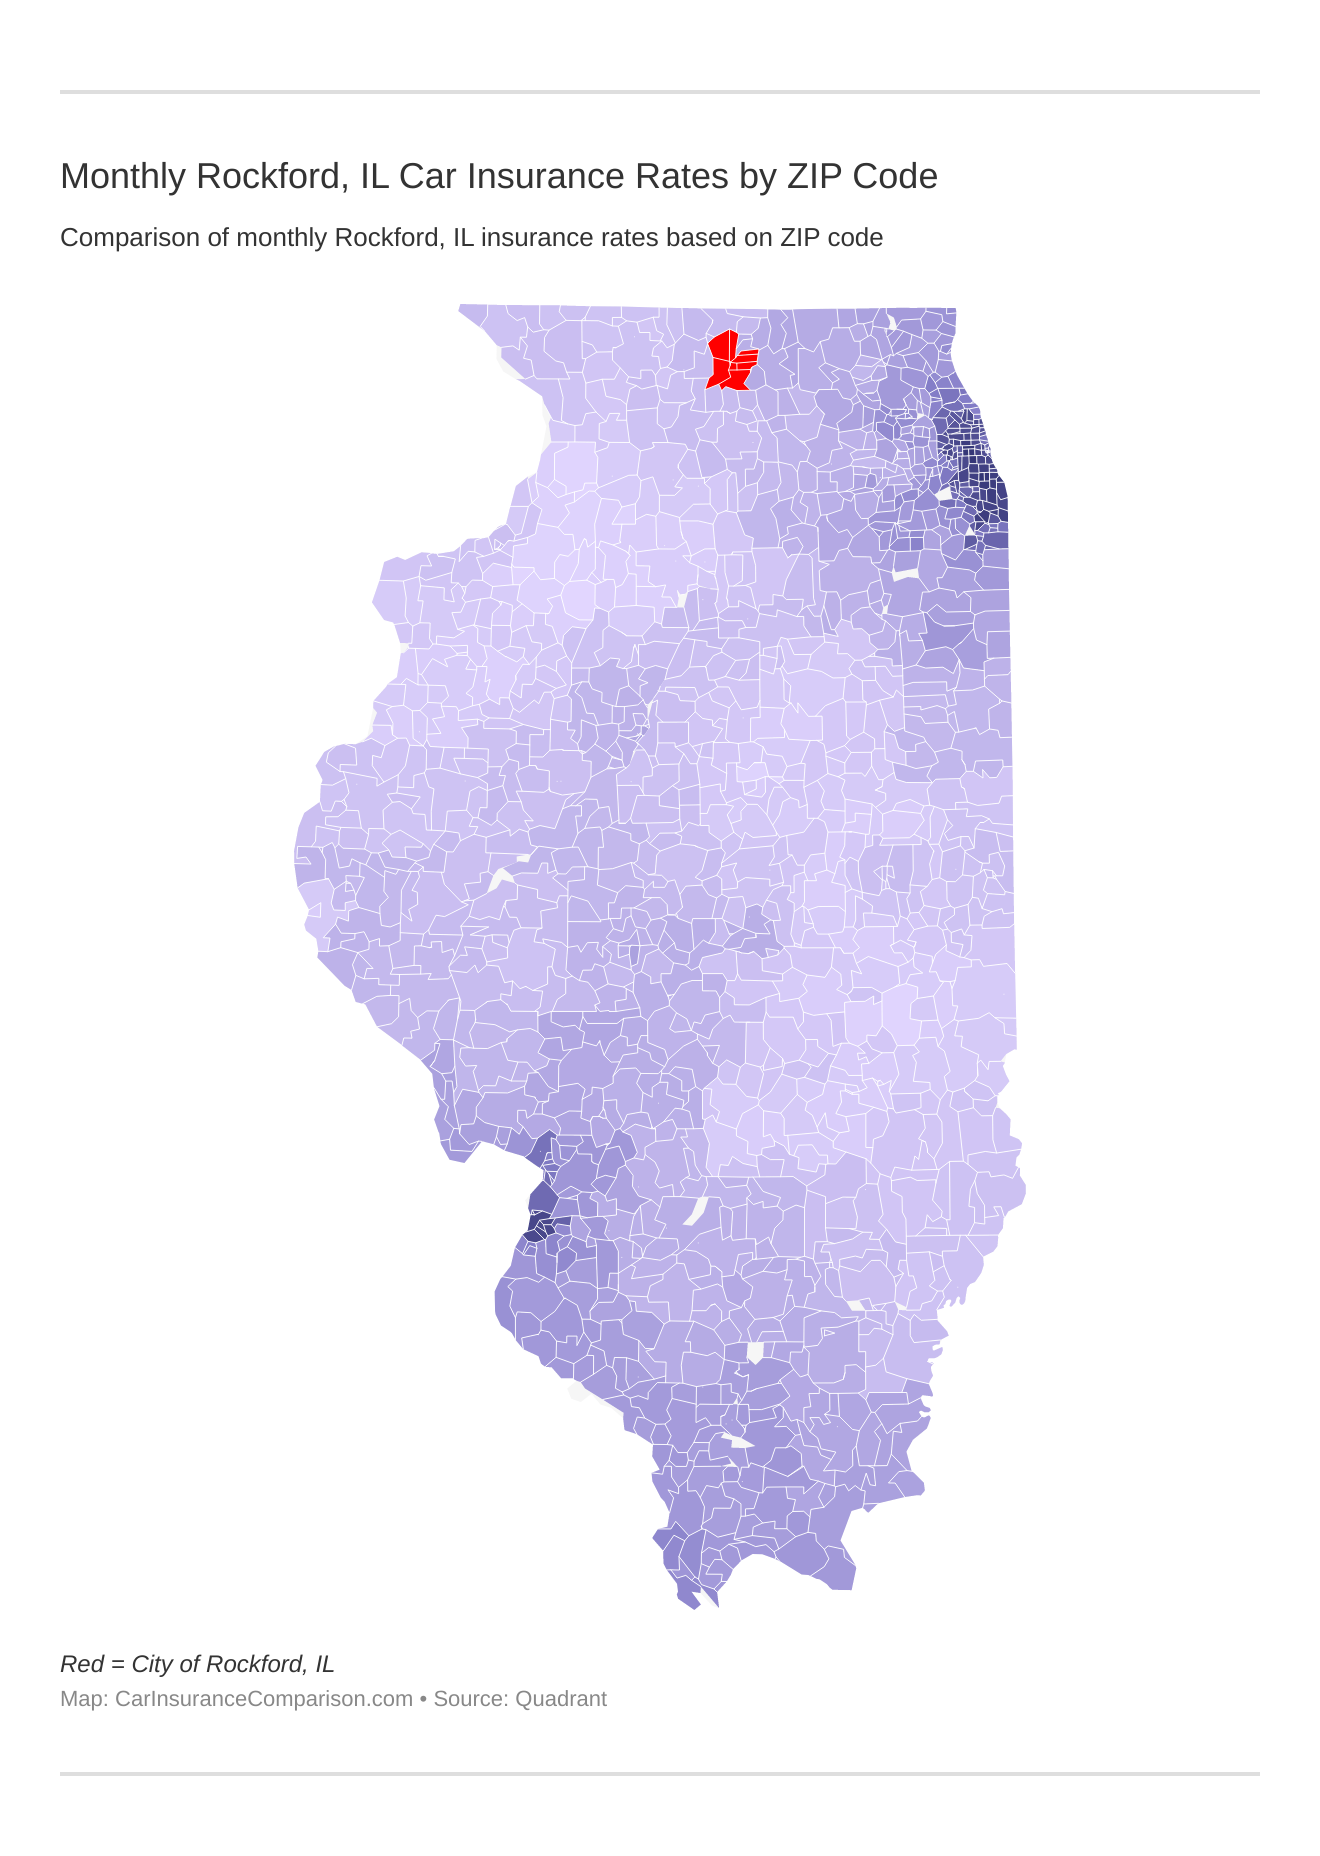 Monthly Rockford, IL Car Insurance Rates by ZIP Code